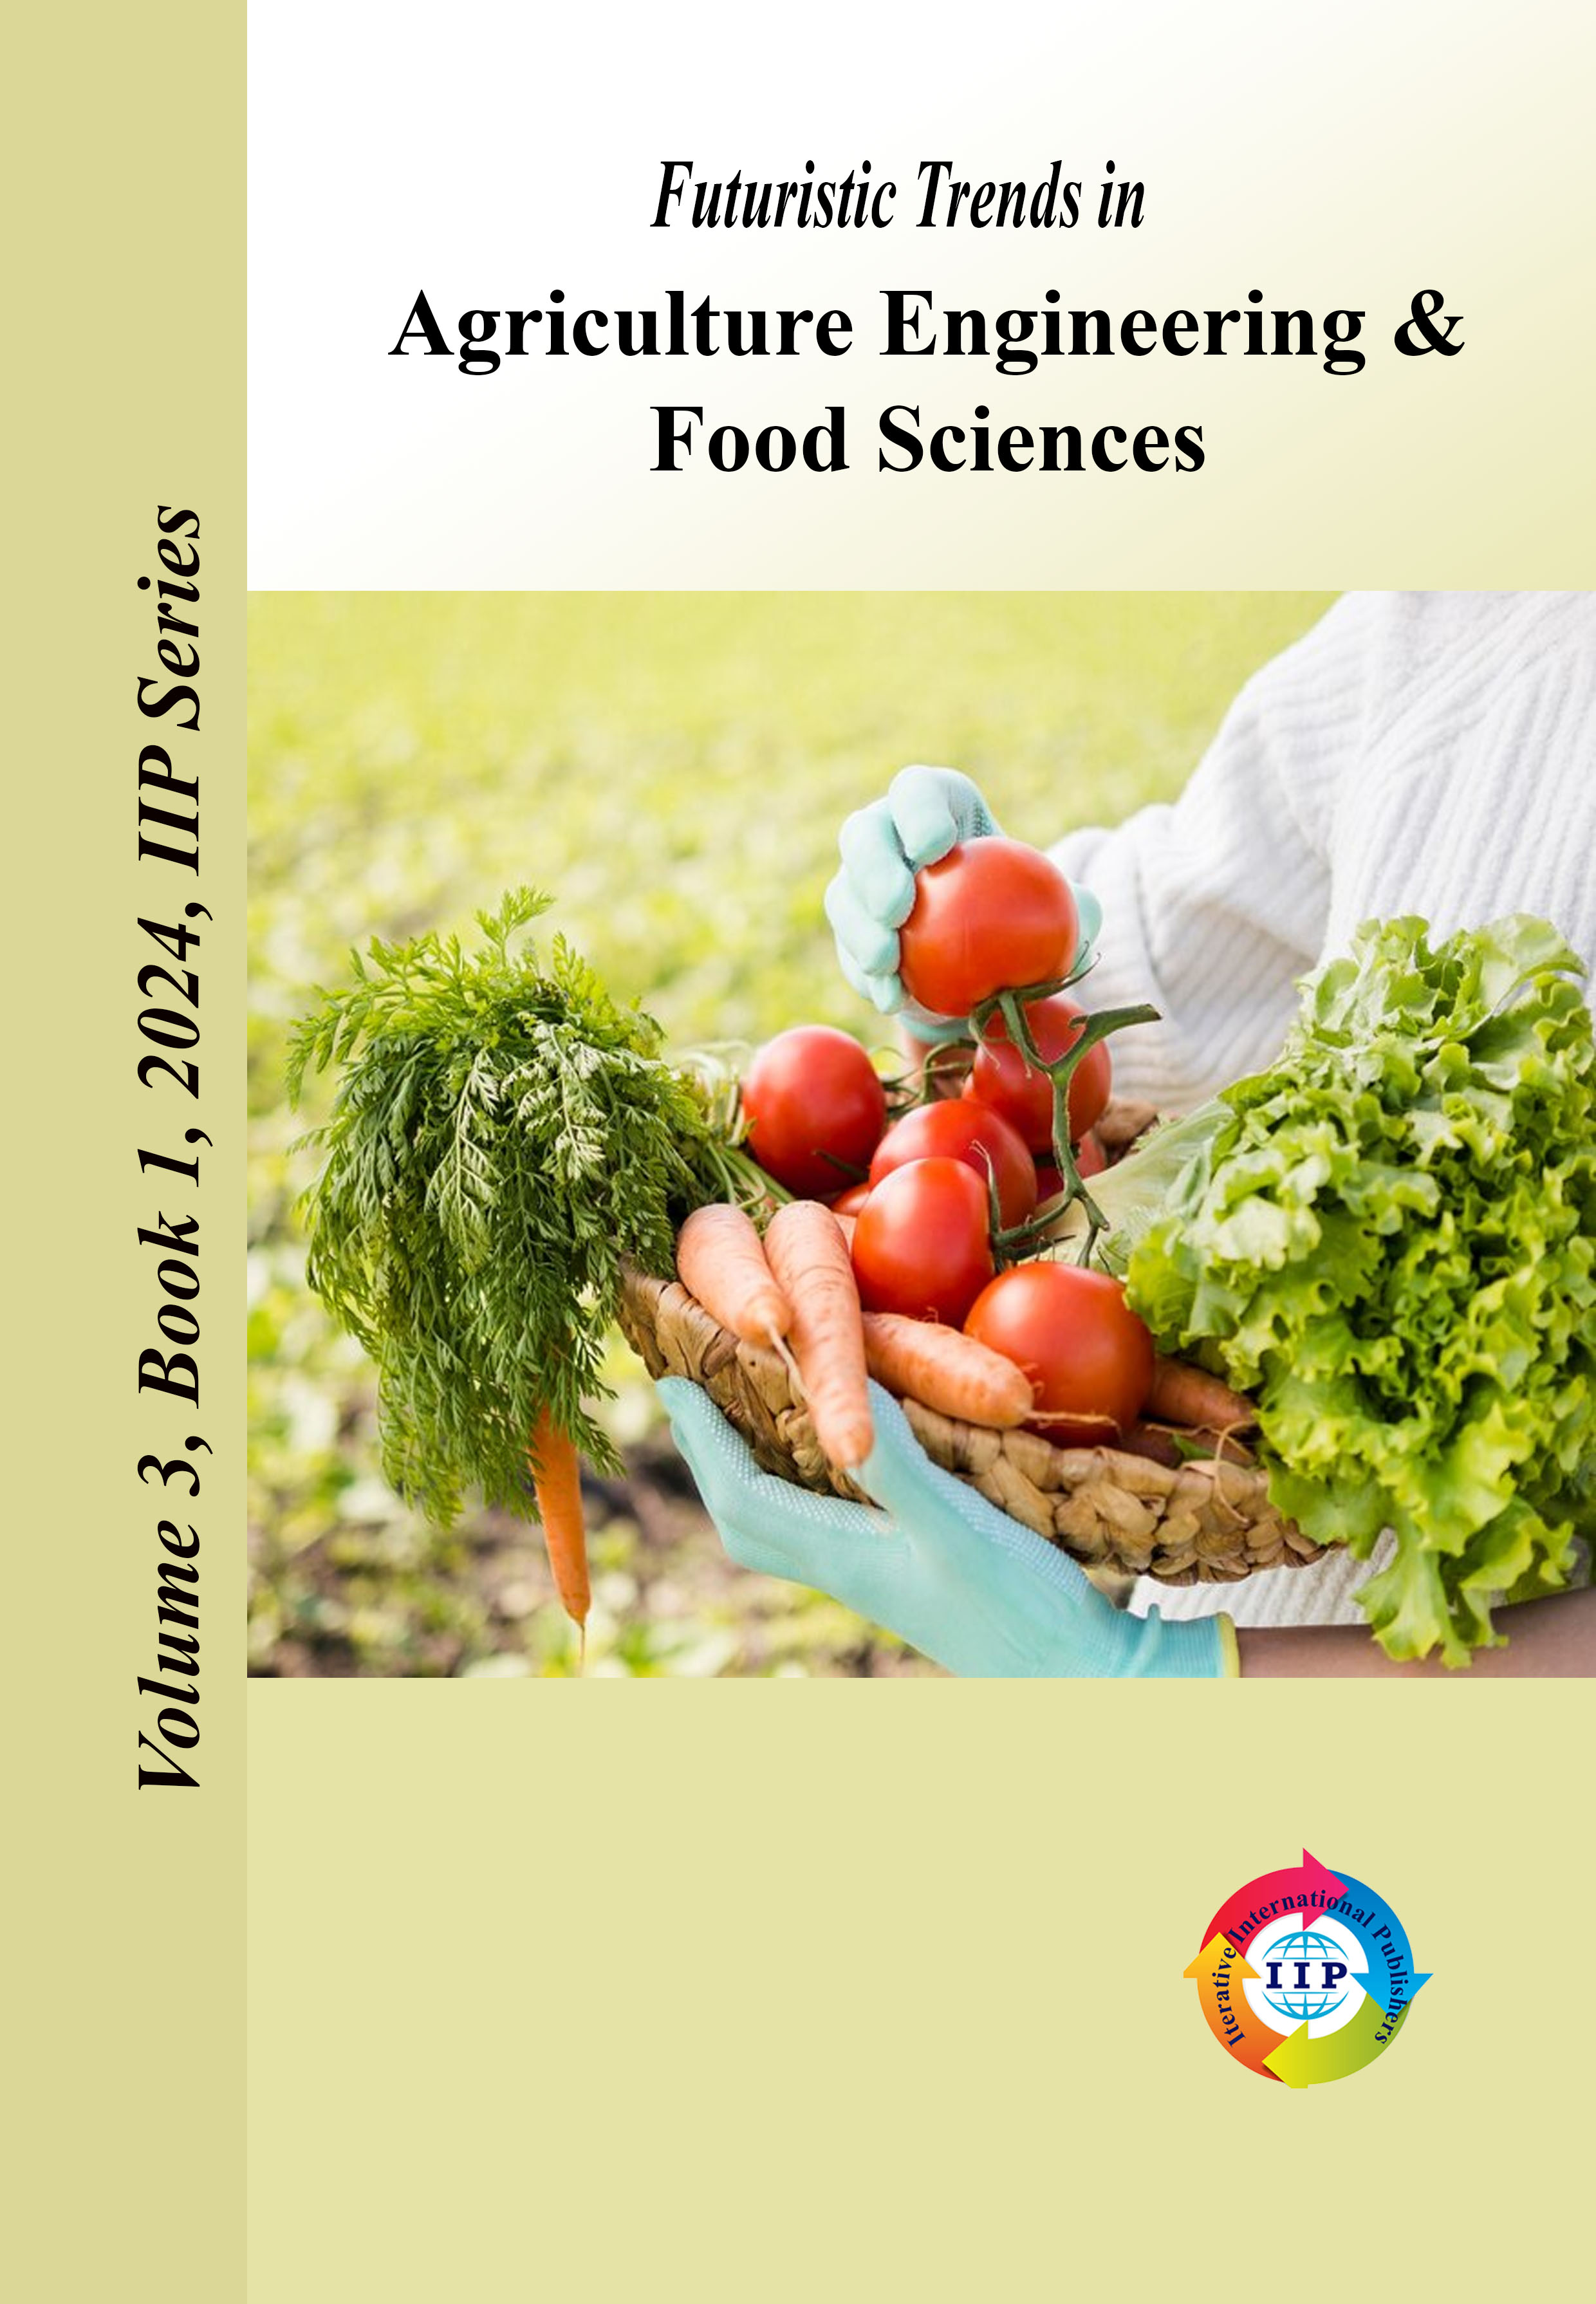 Futuristic Trends in Agriculture Engineering & Food Sciences Volume 3 Book 1